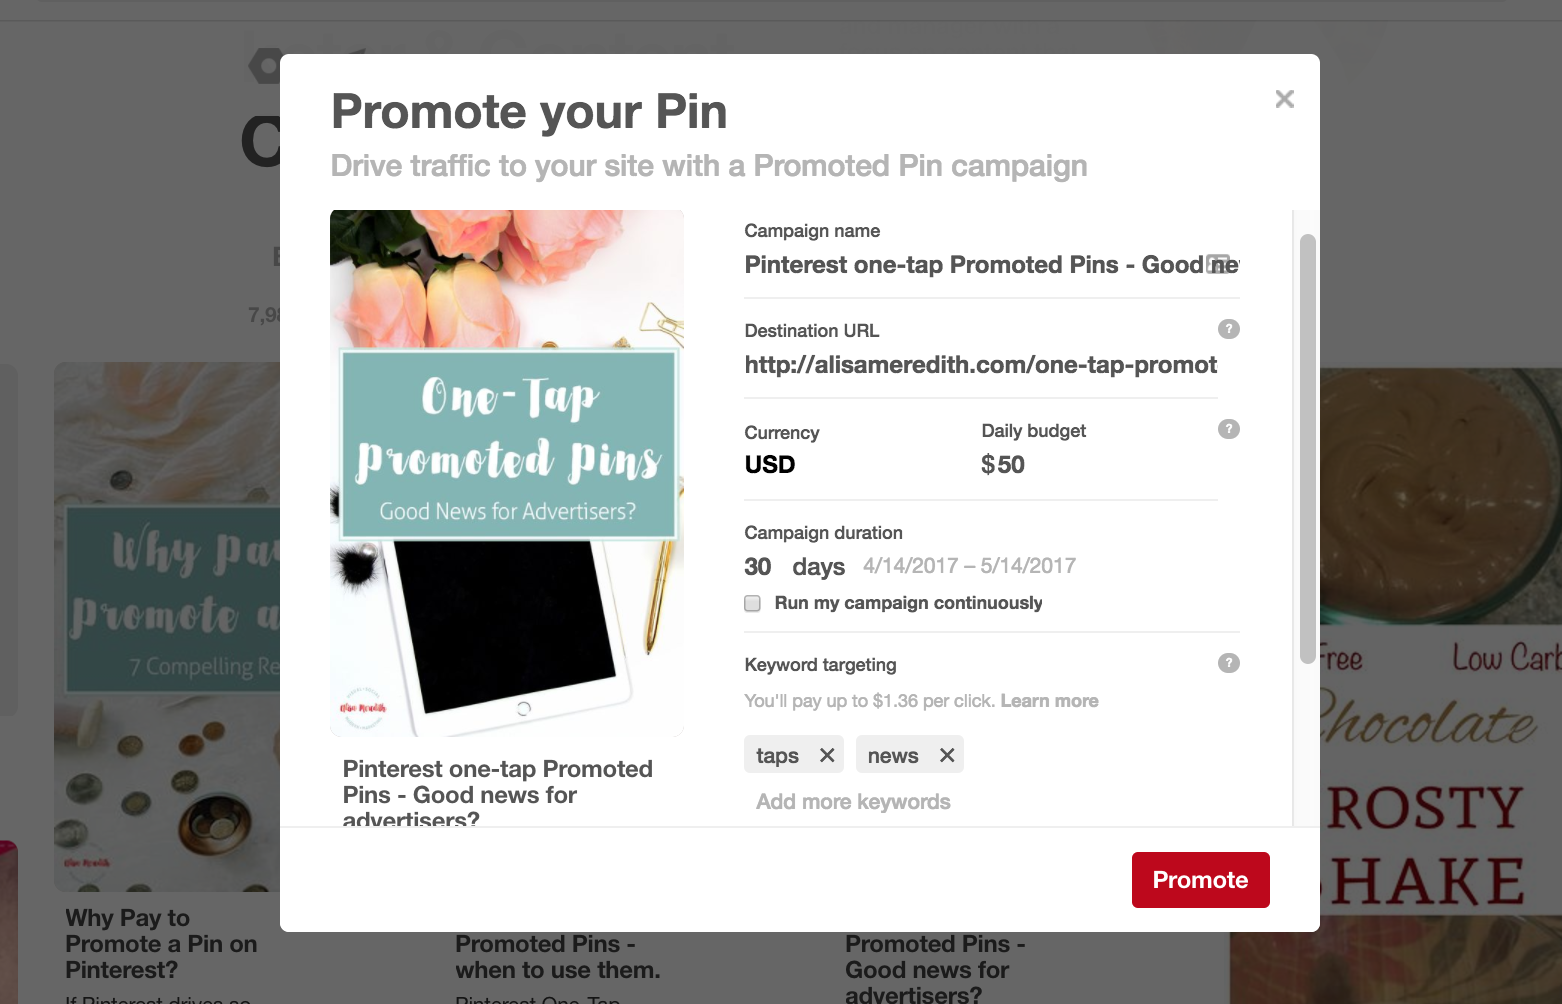 Using the boost button to promote a pin on Pinterest - don't do it!